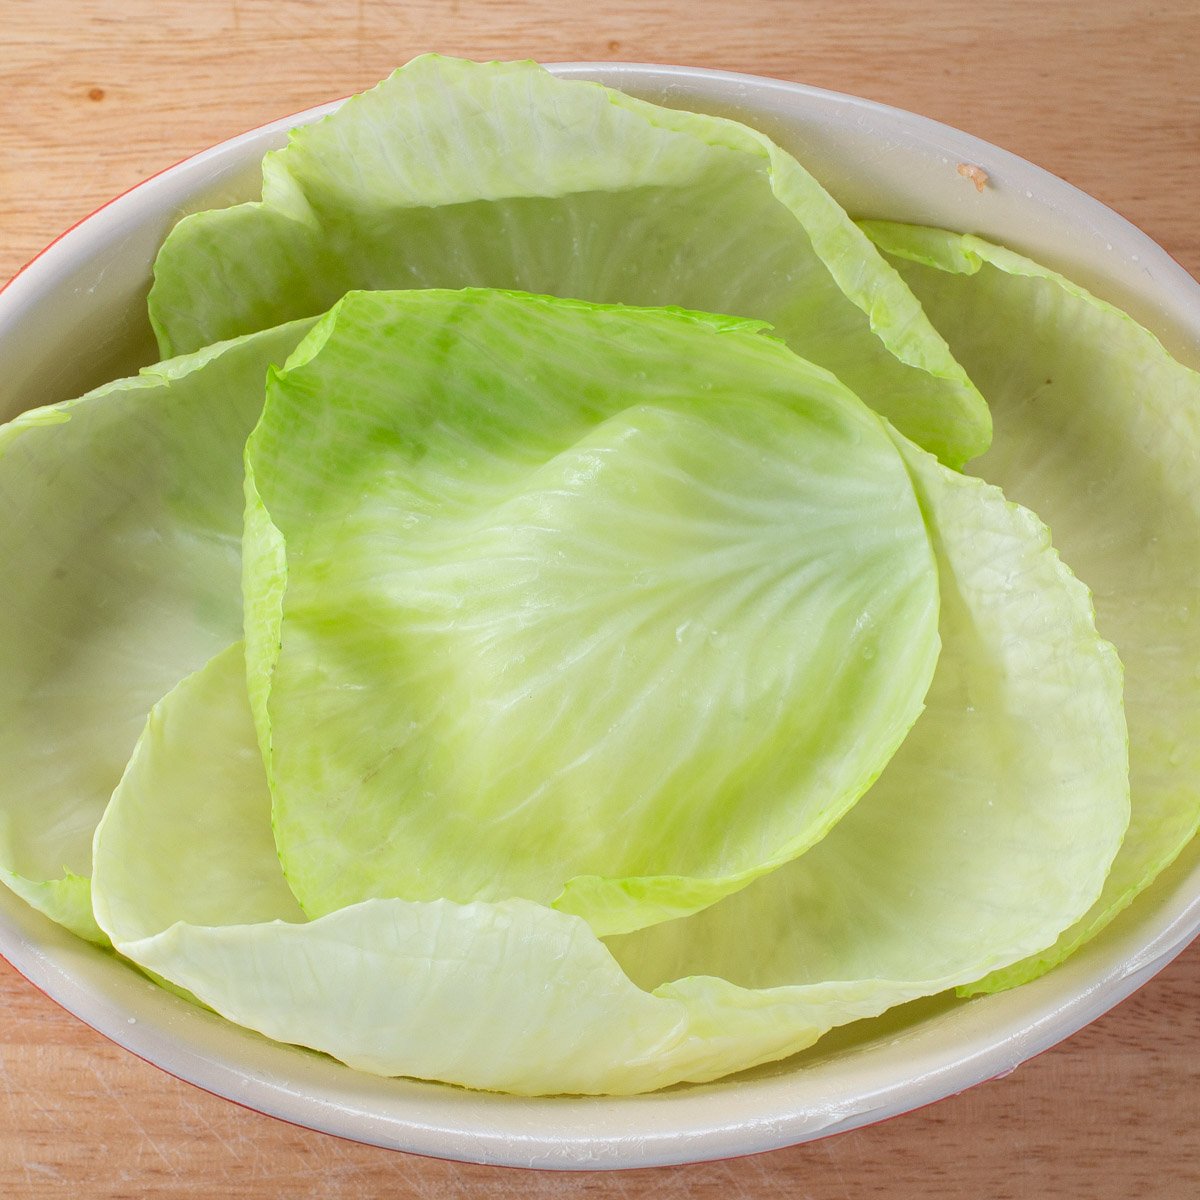 Boiled cabbage leaves in baking dish.